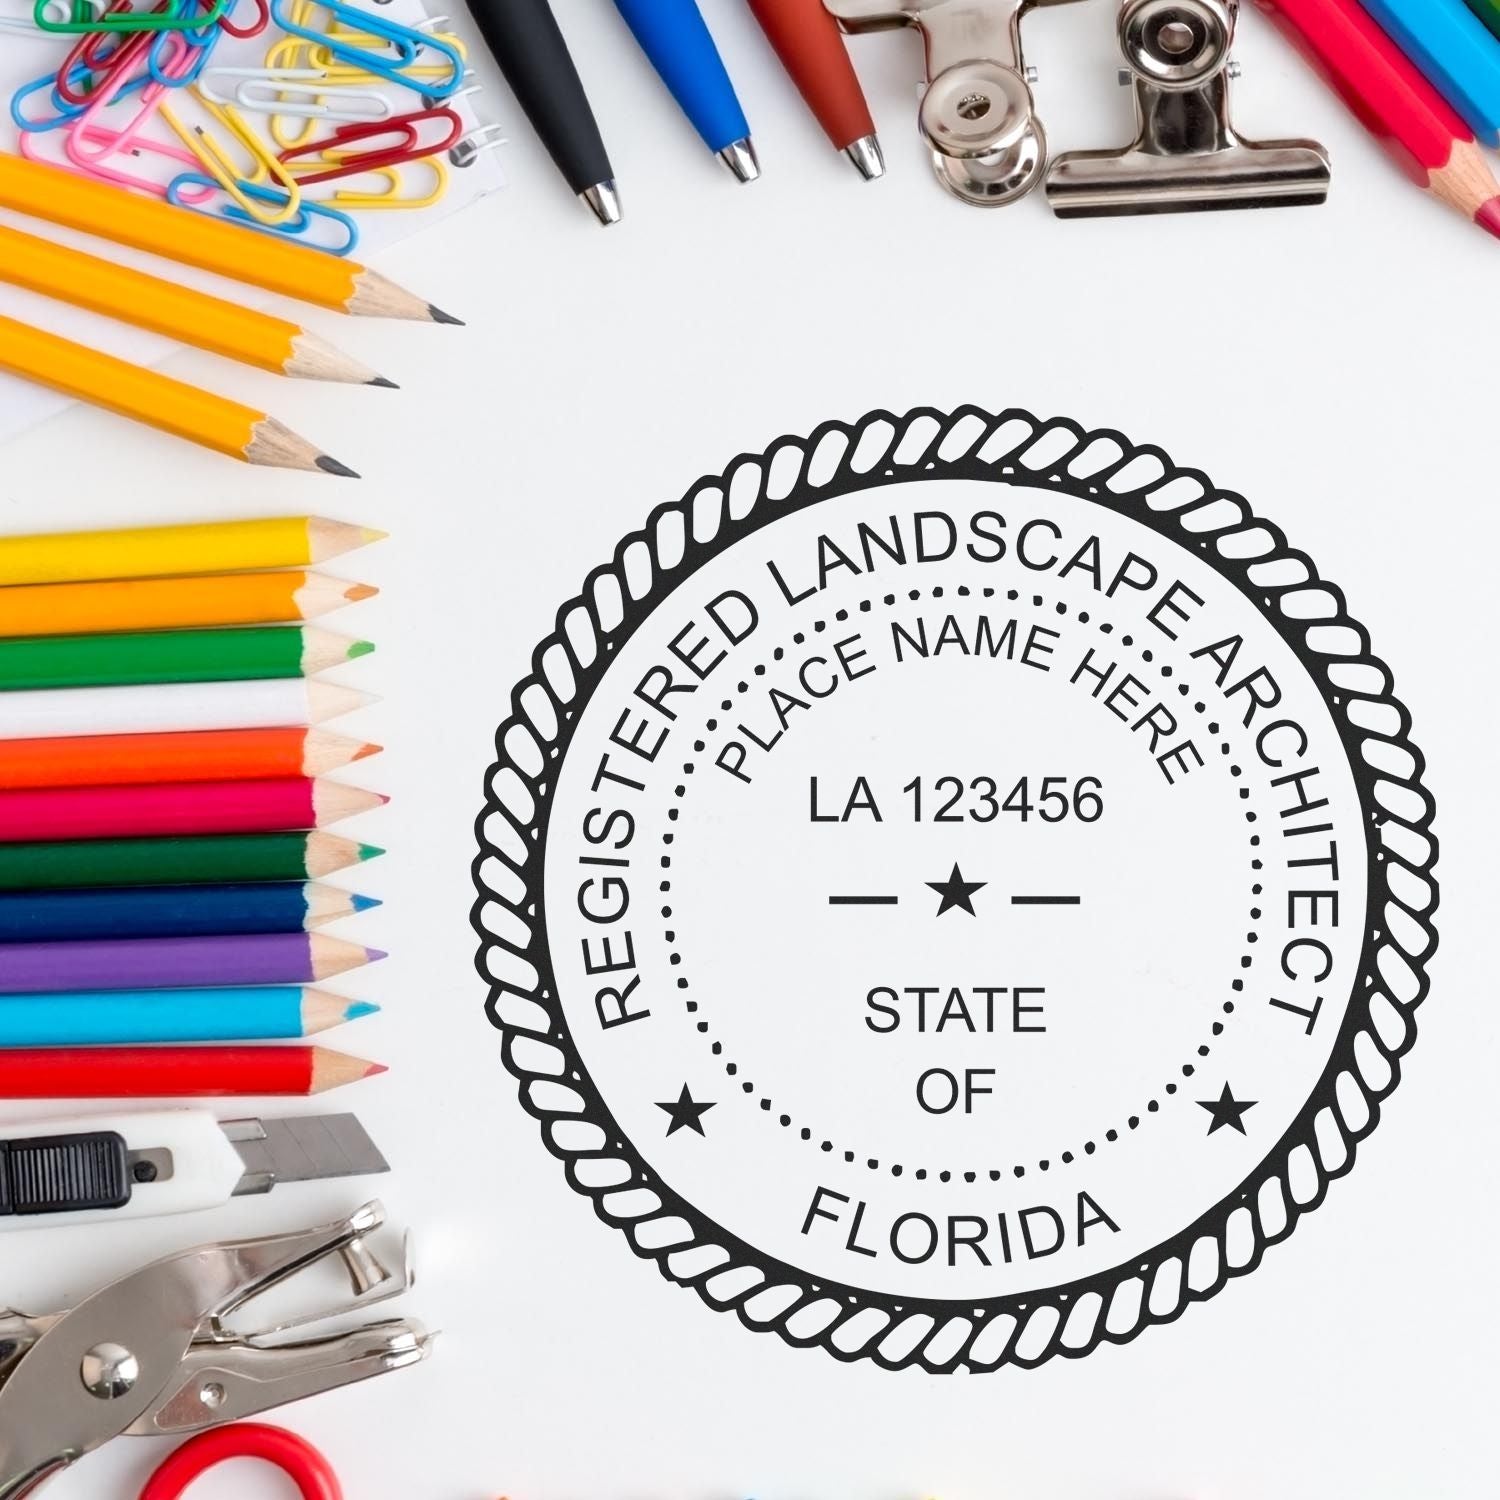 Conquer the Field: Mastering Florida Landscape Architect Stamp Requirements Feature Image